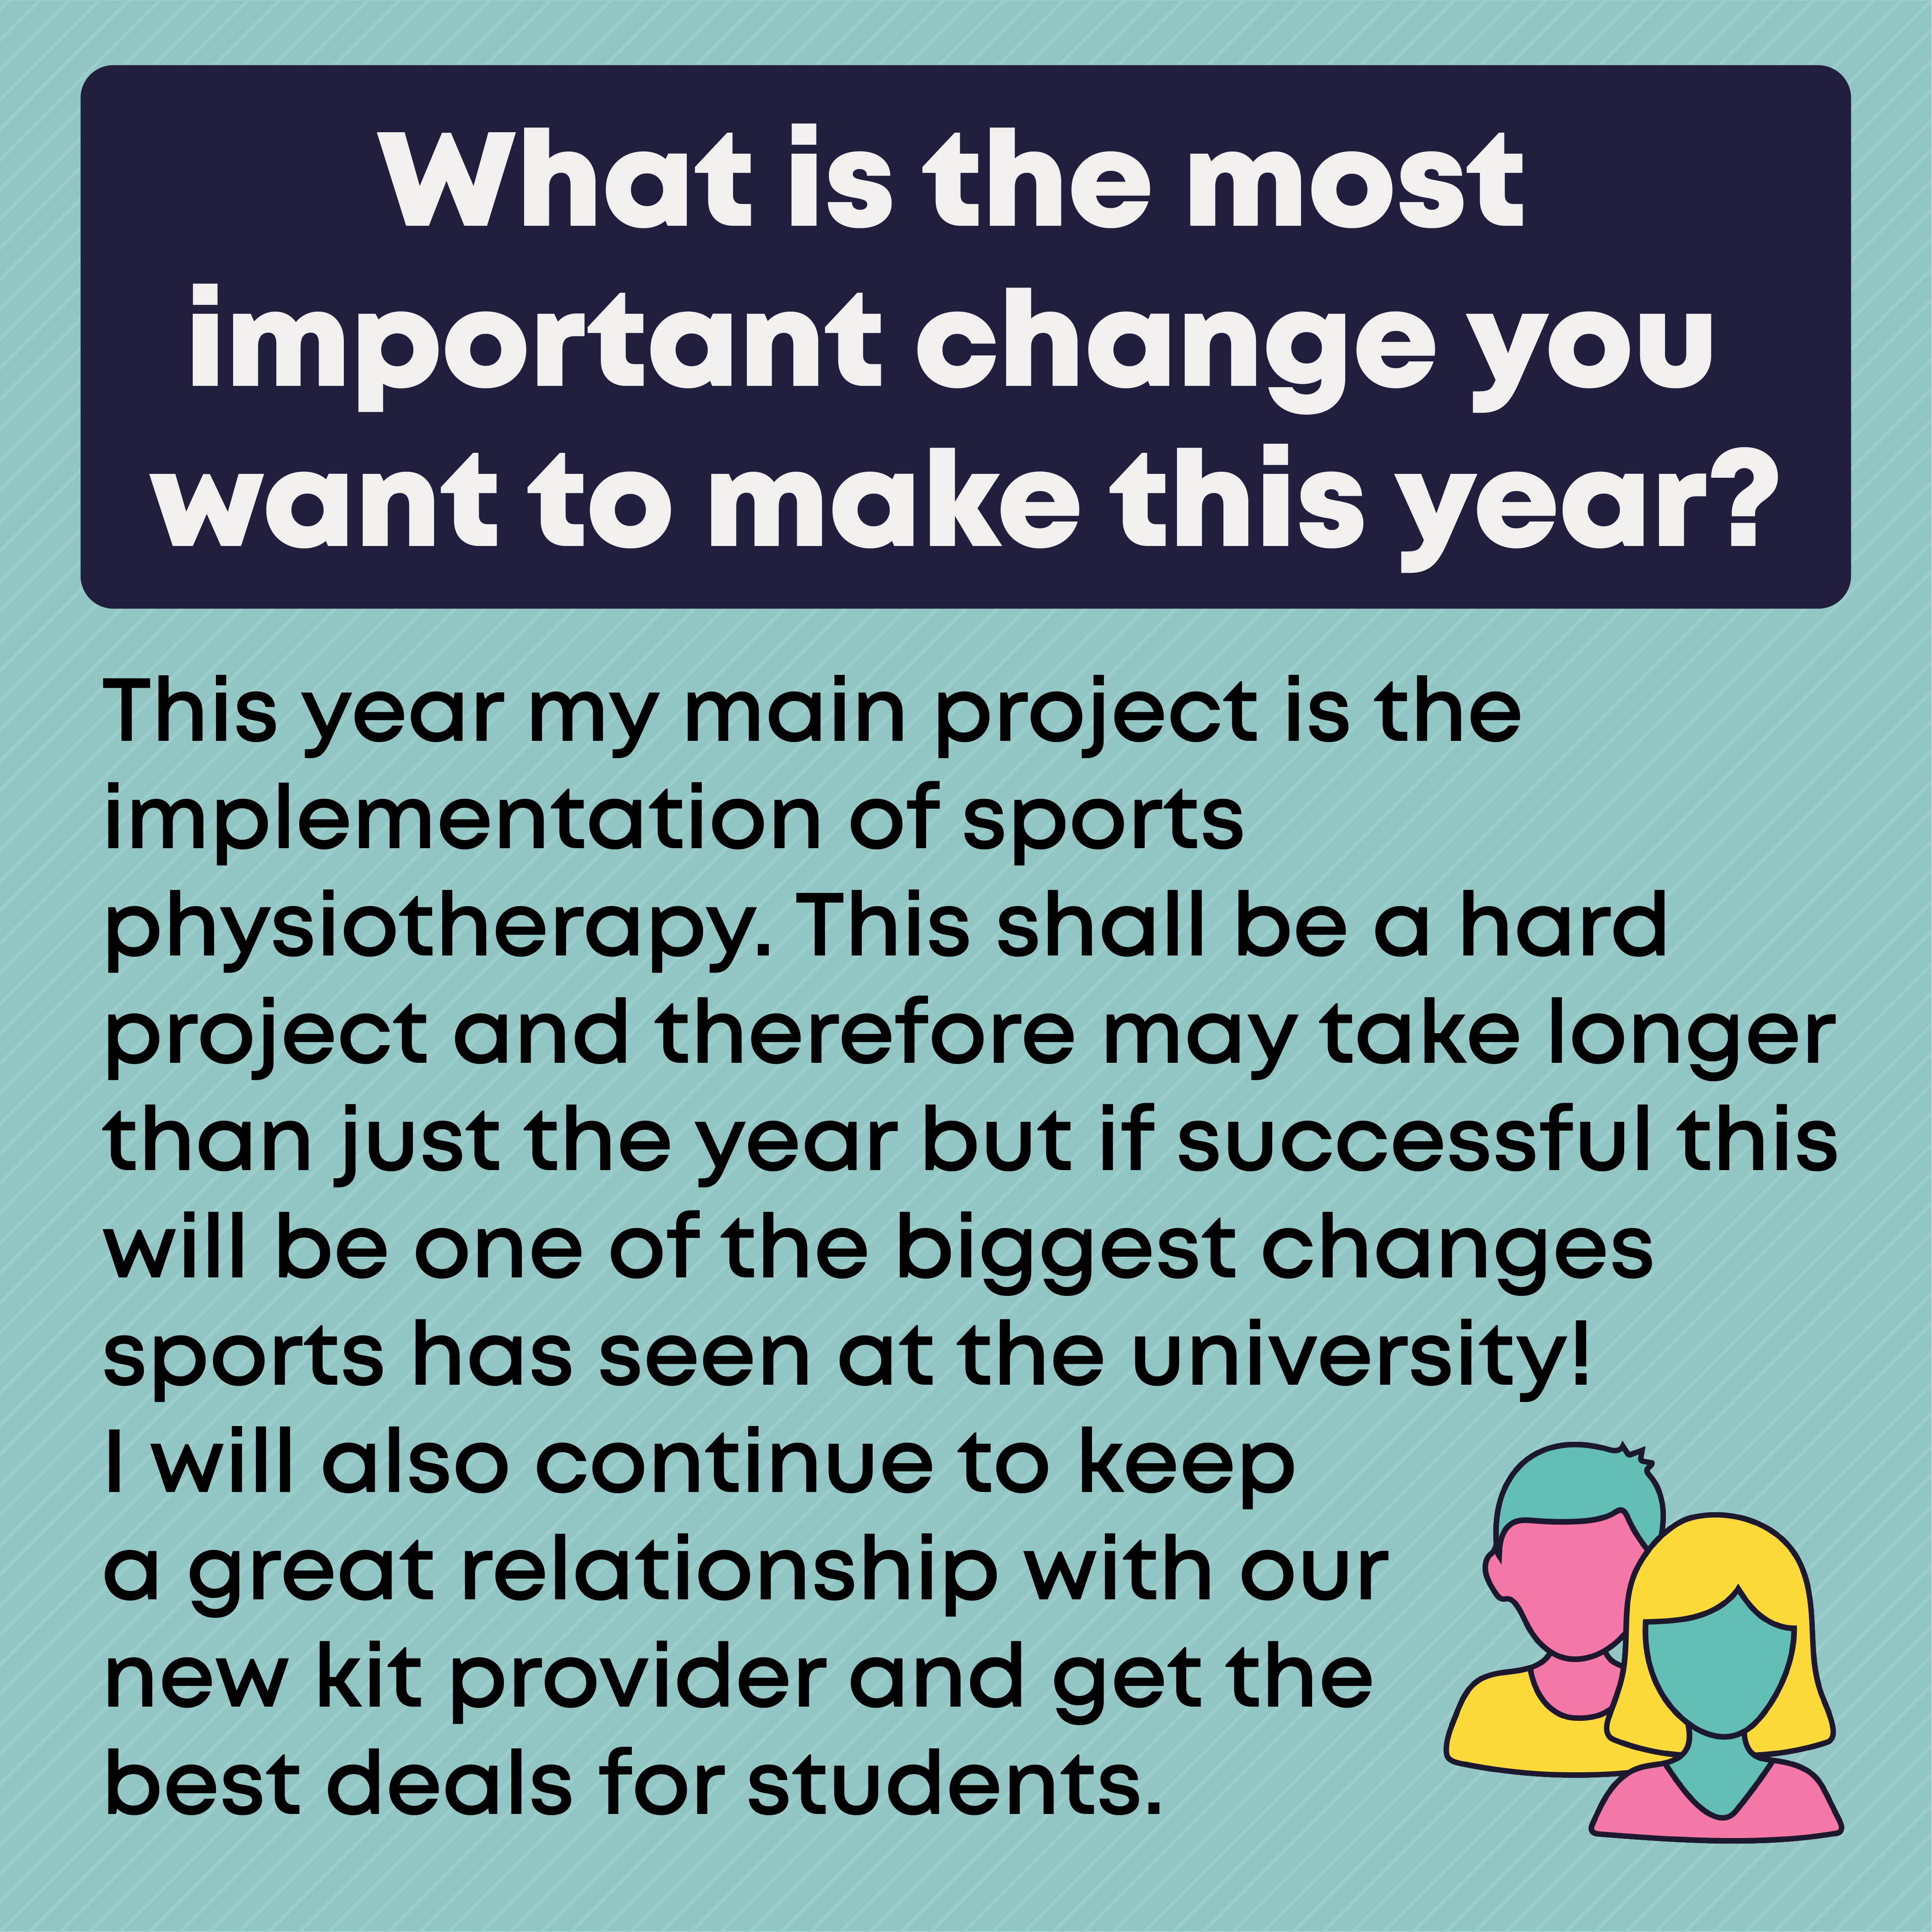 What is the most important change you want to make this year?  This year my main project is the implementation of sports physiotherapy. This shall be a hard project and therefore may take longer than just the year but if successful this will be one of the biggest changes sports has seen at the university! I will also continue to keep a great relationship with our new kit provider and get the best deals for students.